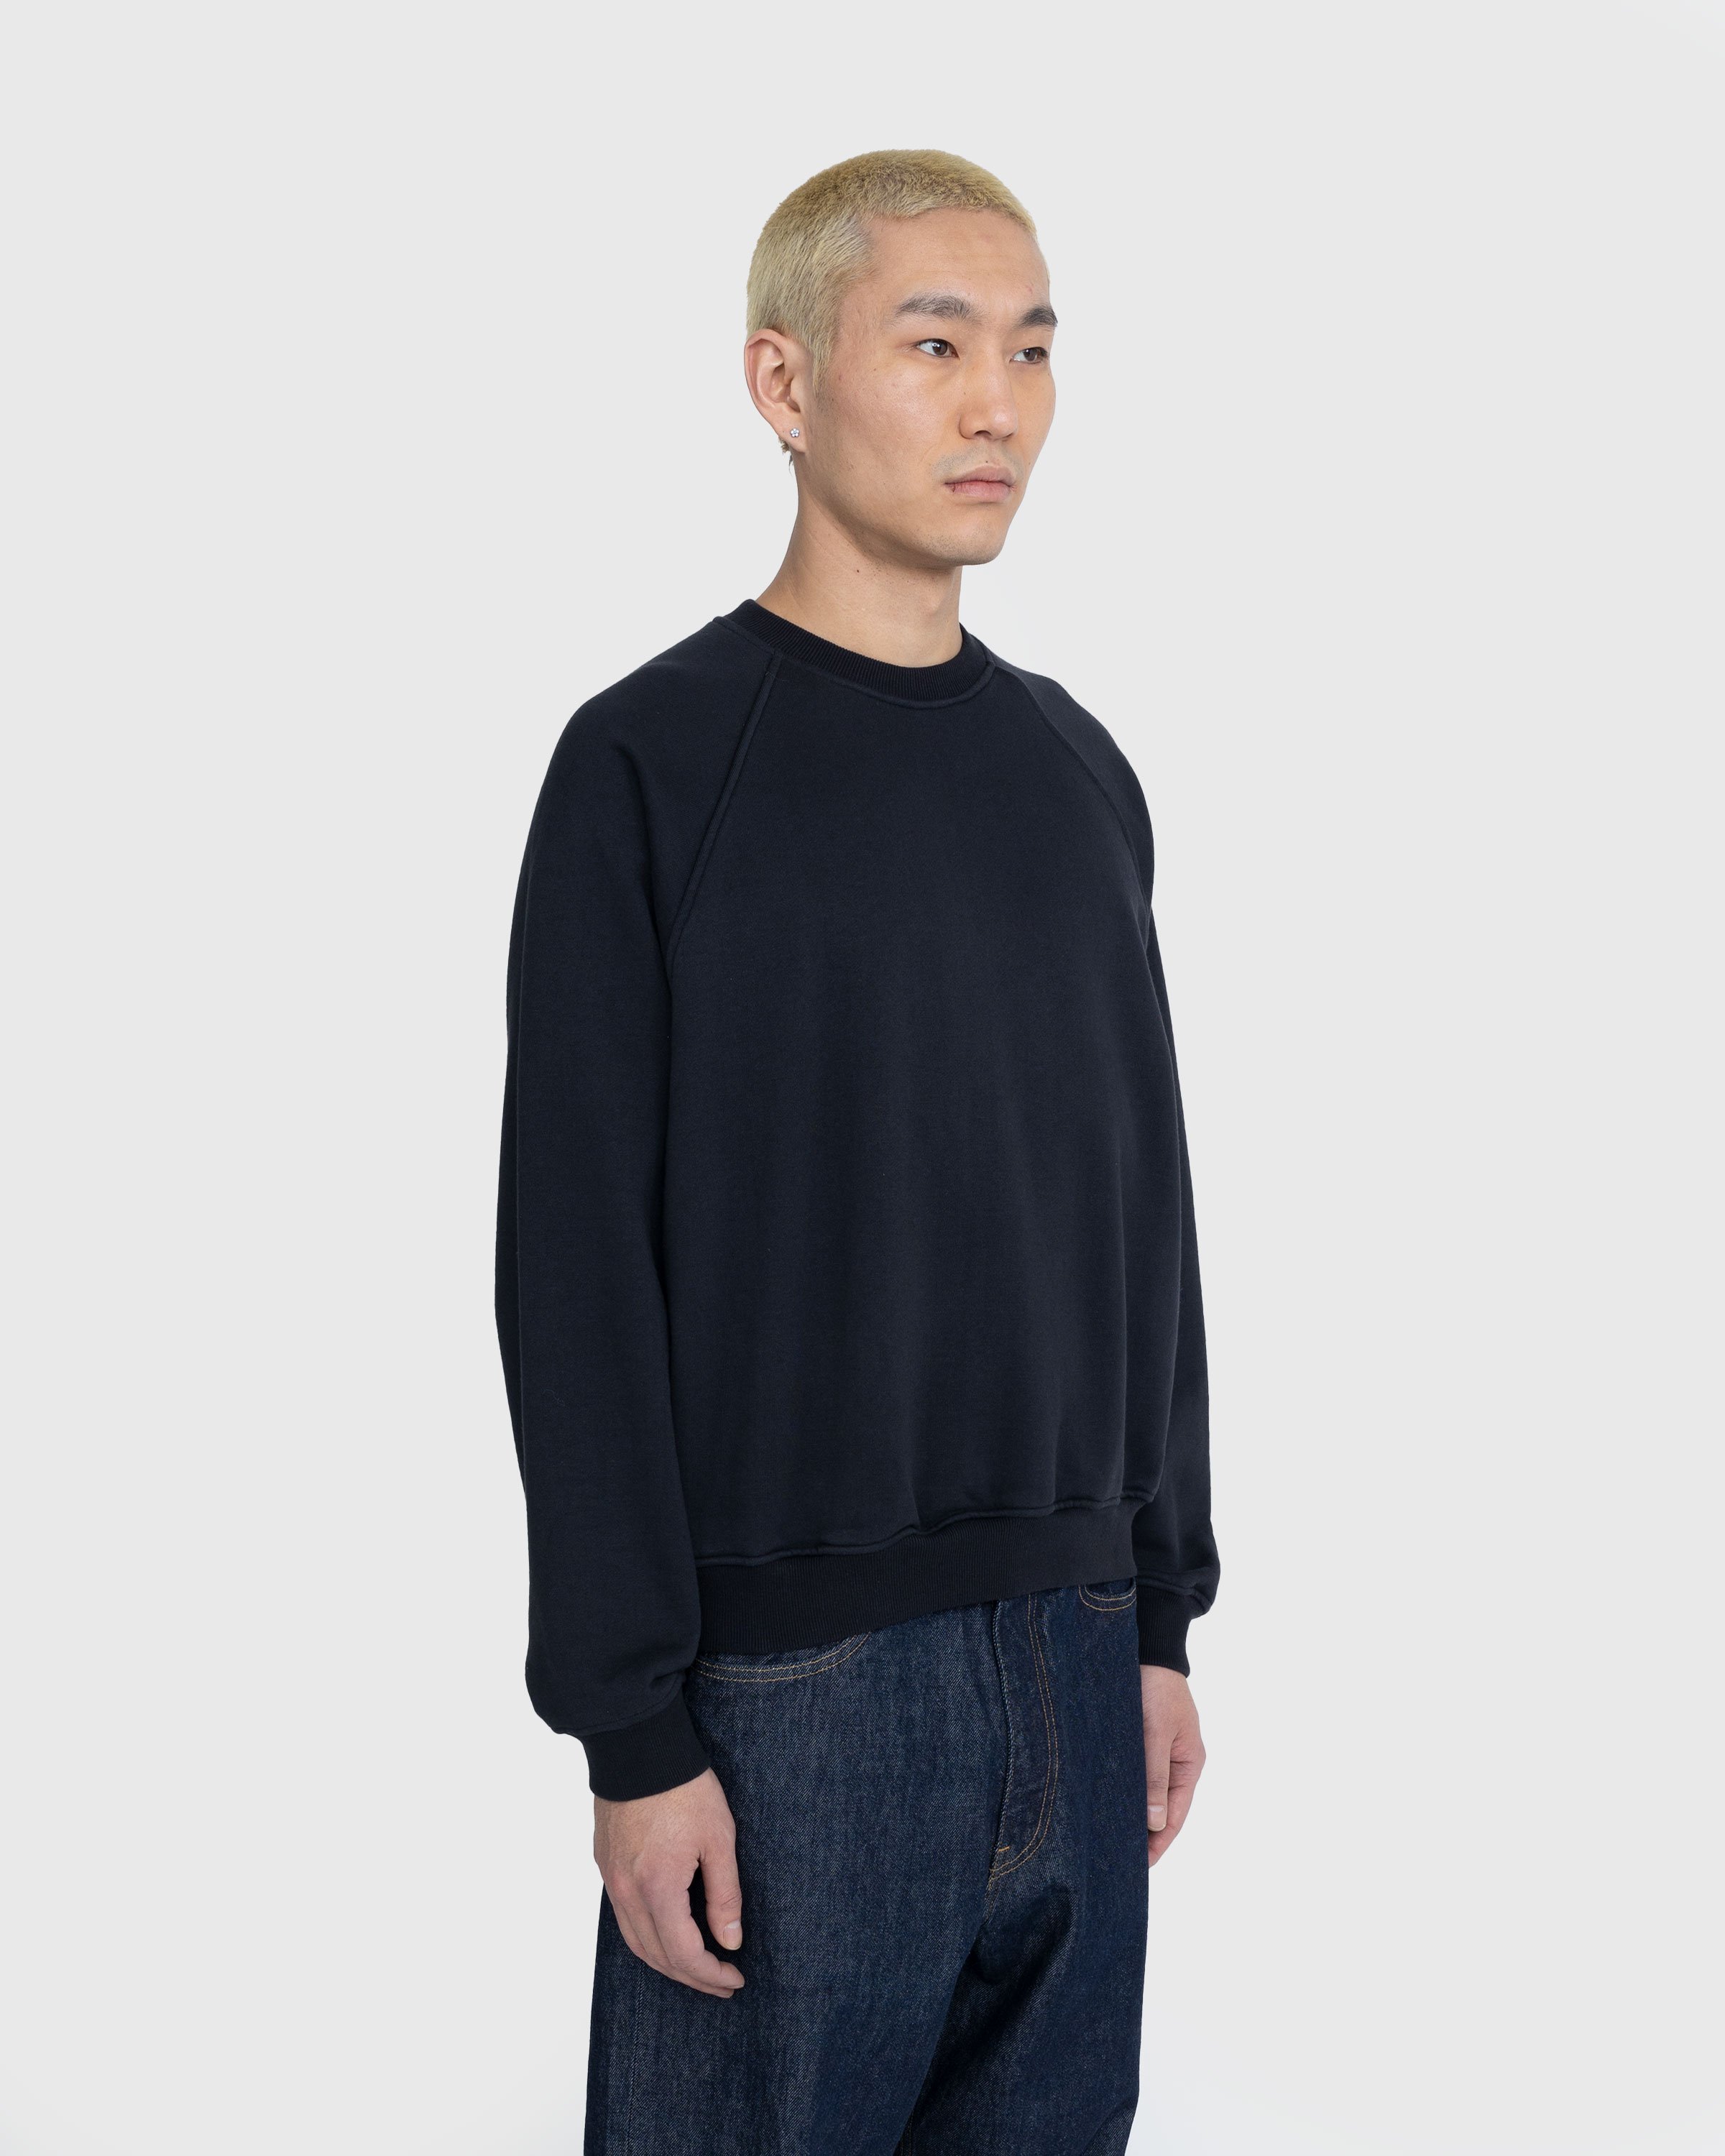 Auralee - Smooth Soft Sweat Pullover Black - Clothing - Black - Image 3